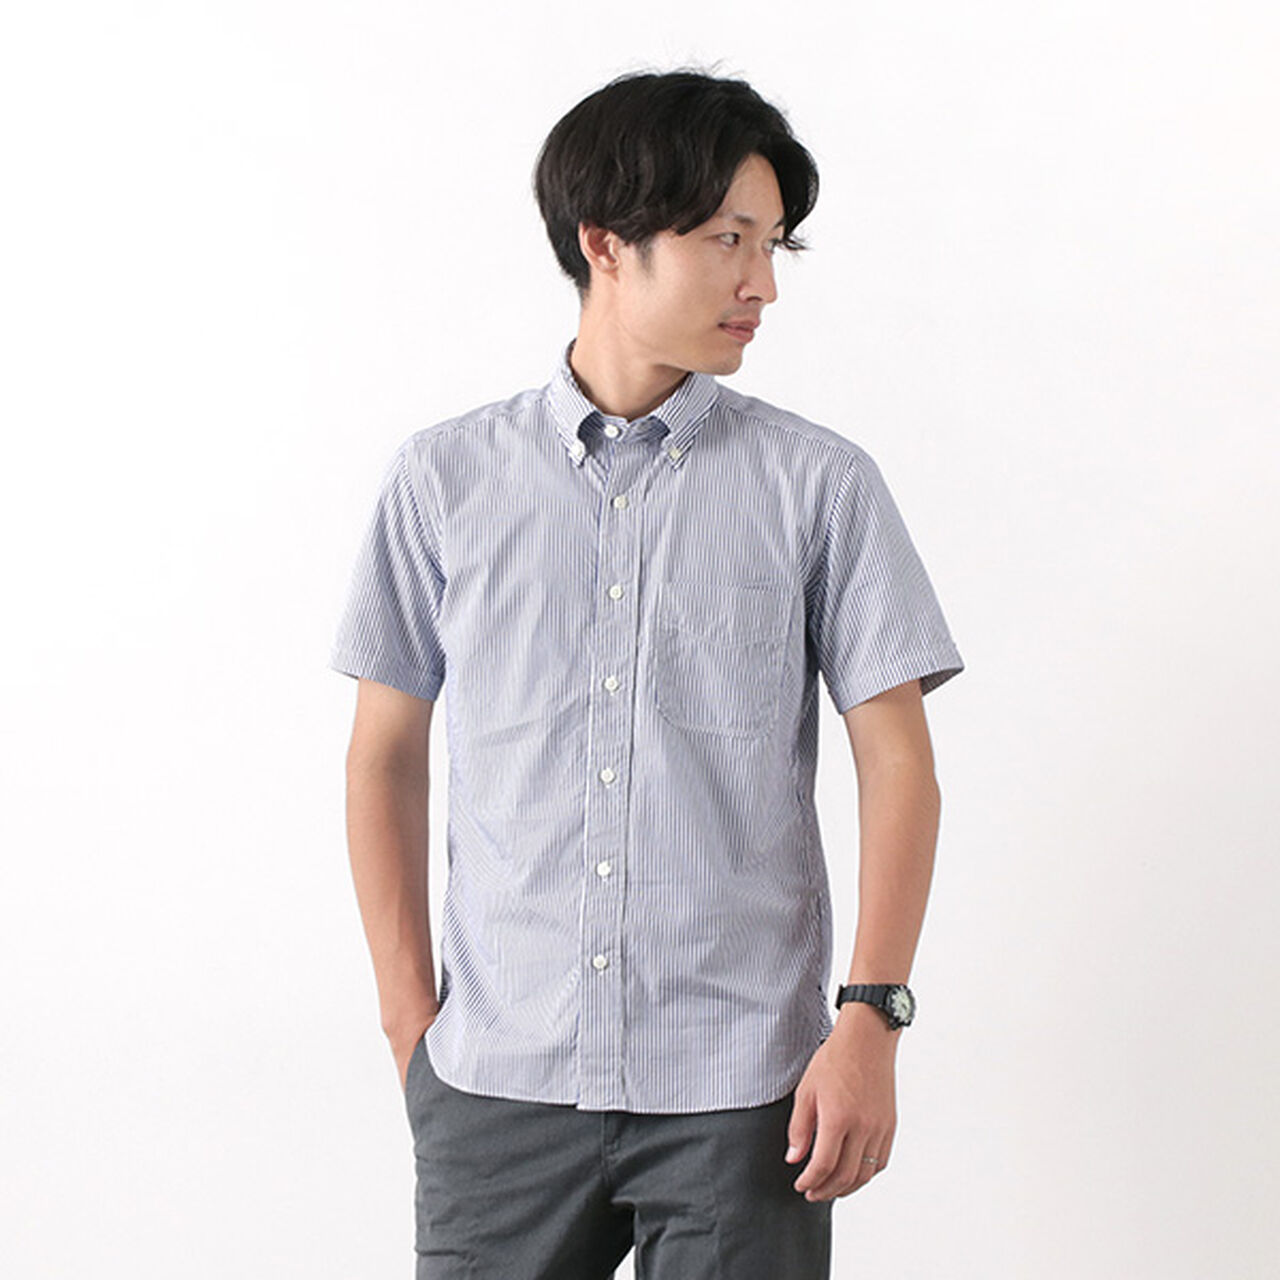 Broad Stripe Short Sleeve Button Down Shirt,Navy_White, large image number 0